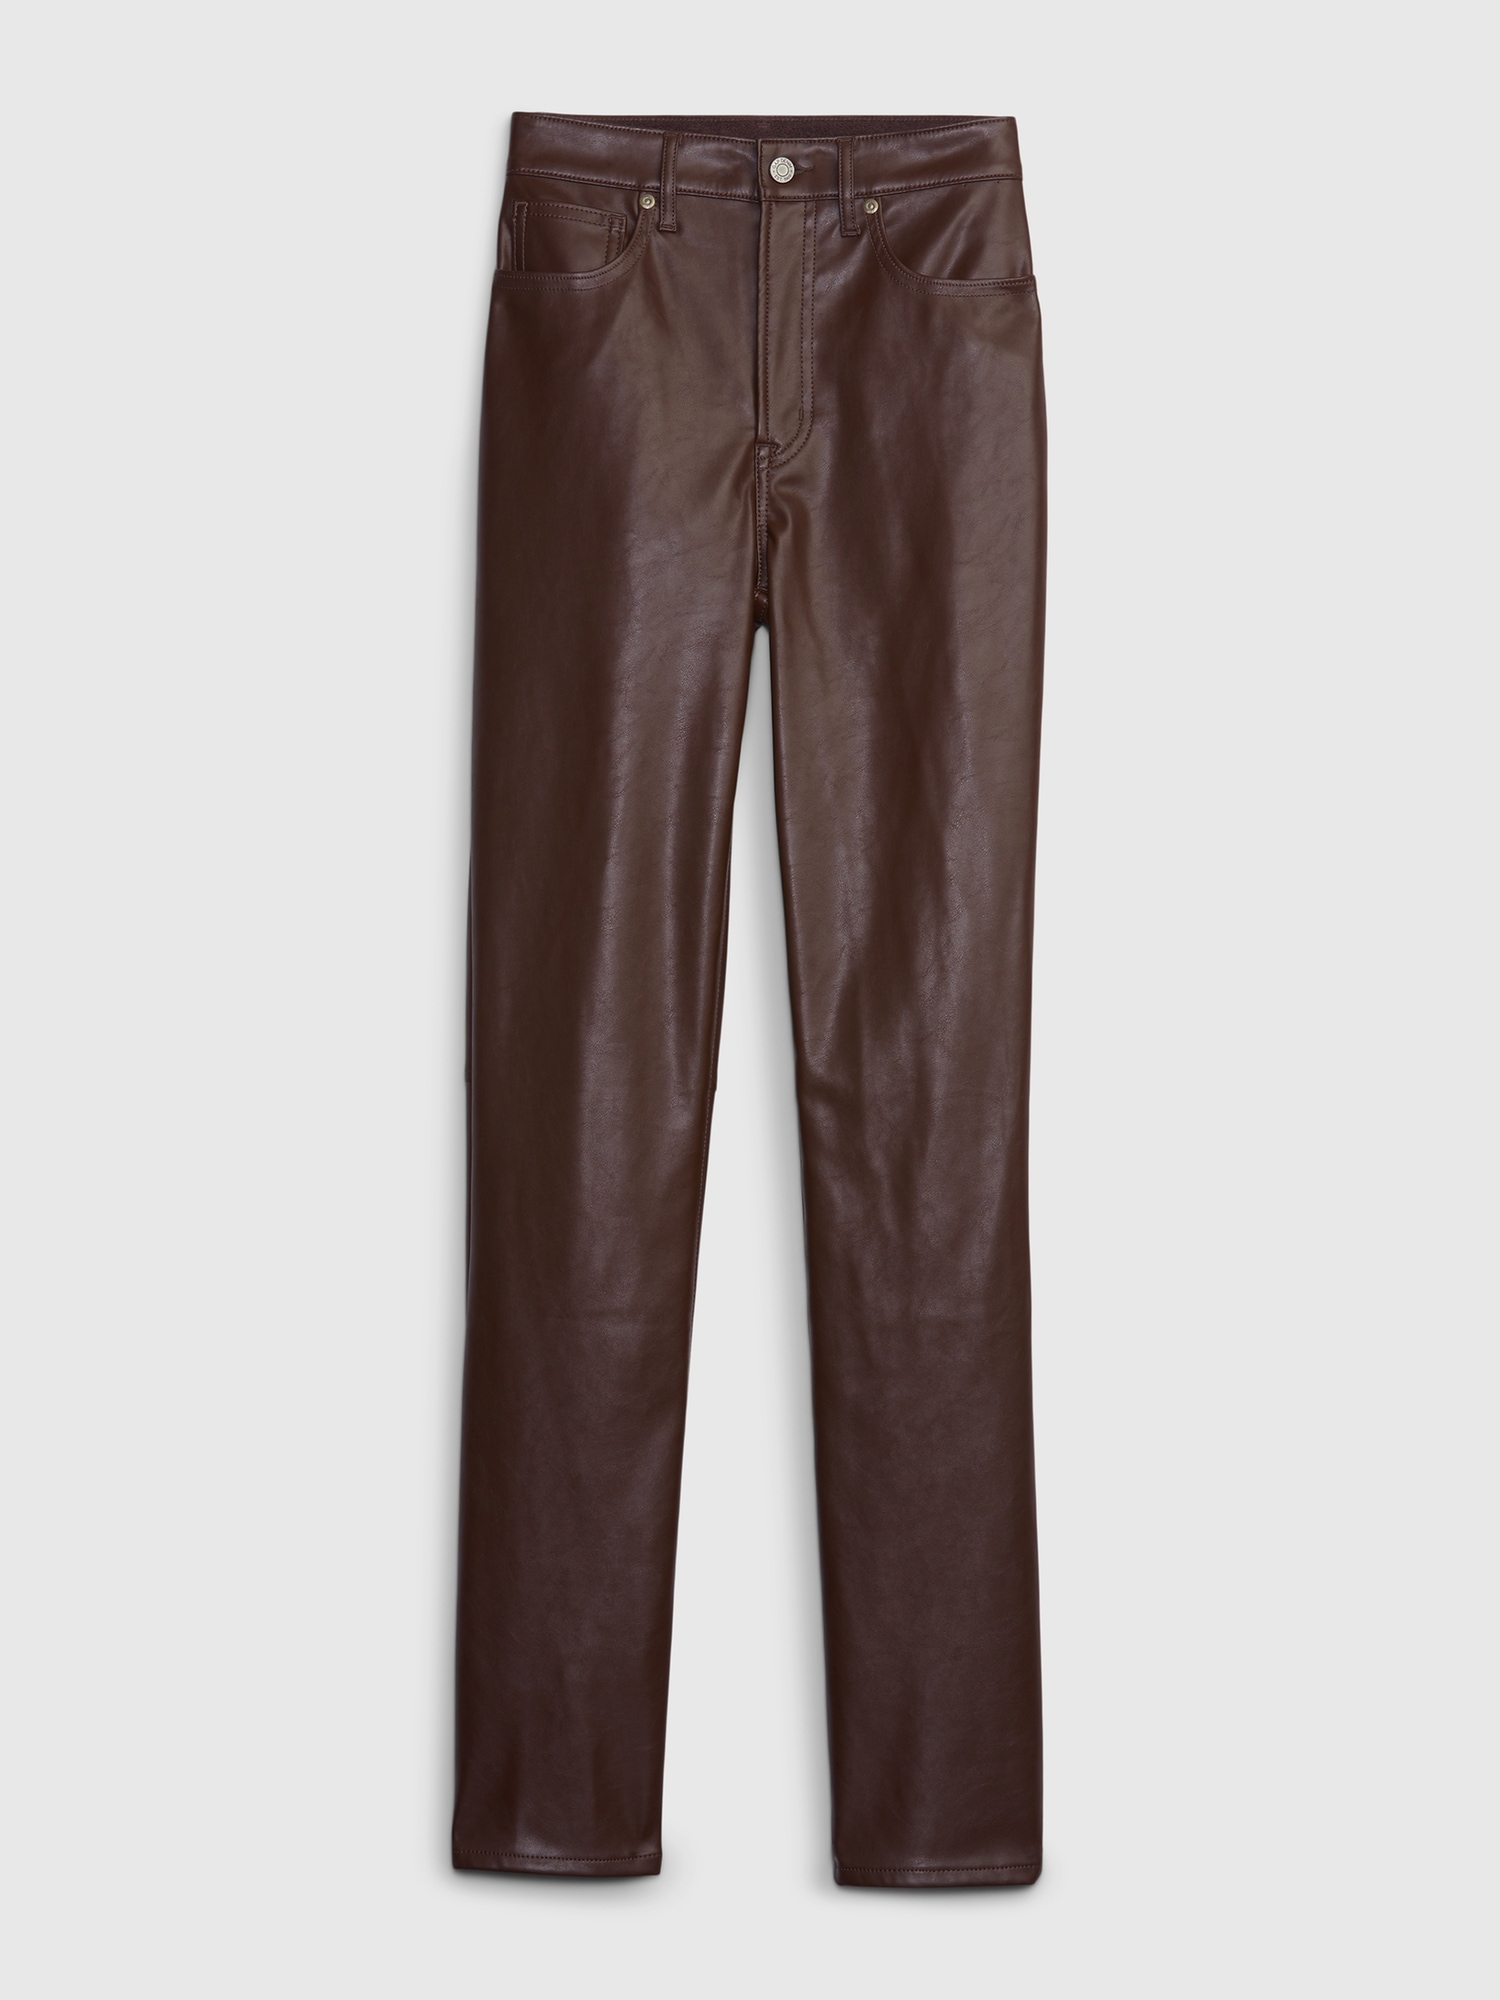 Vintage 100% Leather Brown Pants / 90's High Rise Chocolate Brown